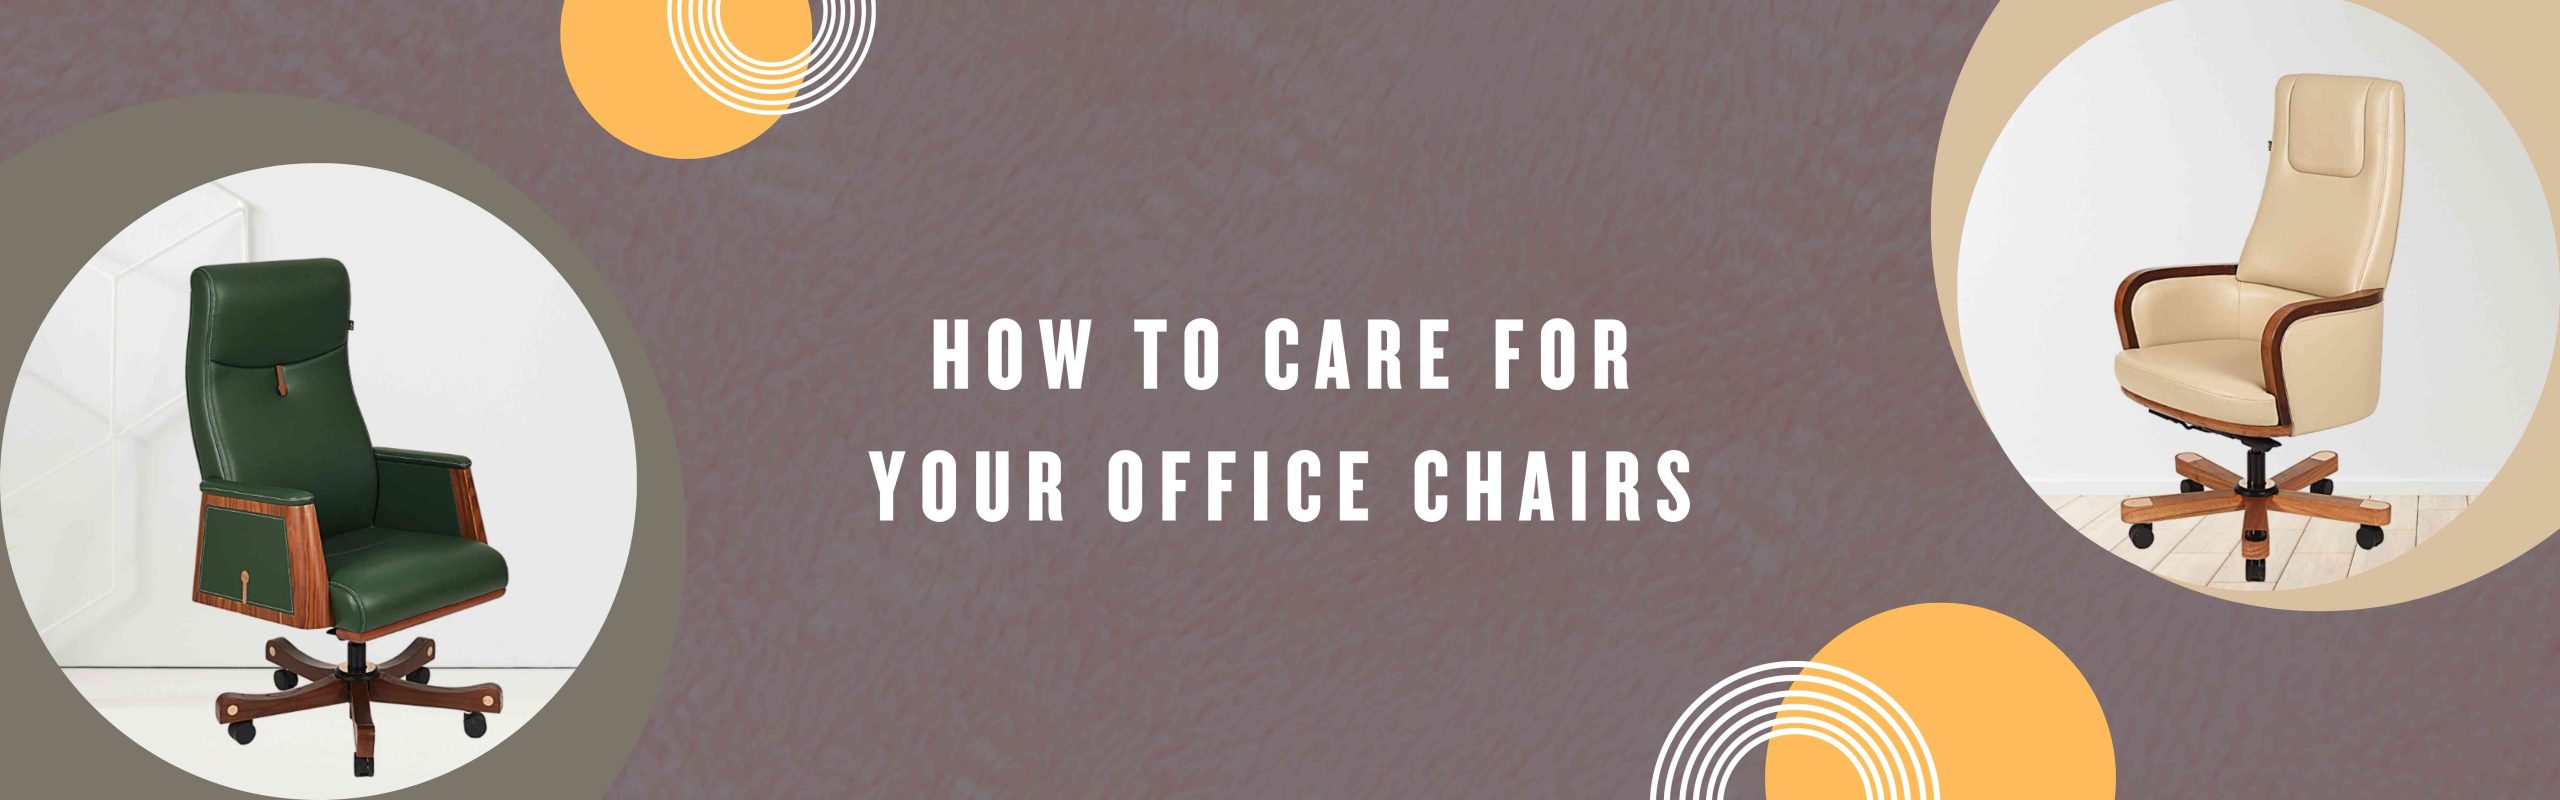 How to Care for Your Office Chairs